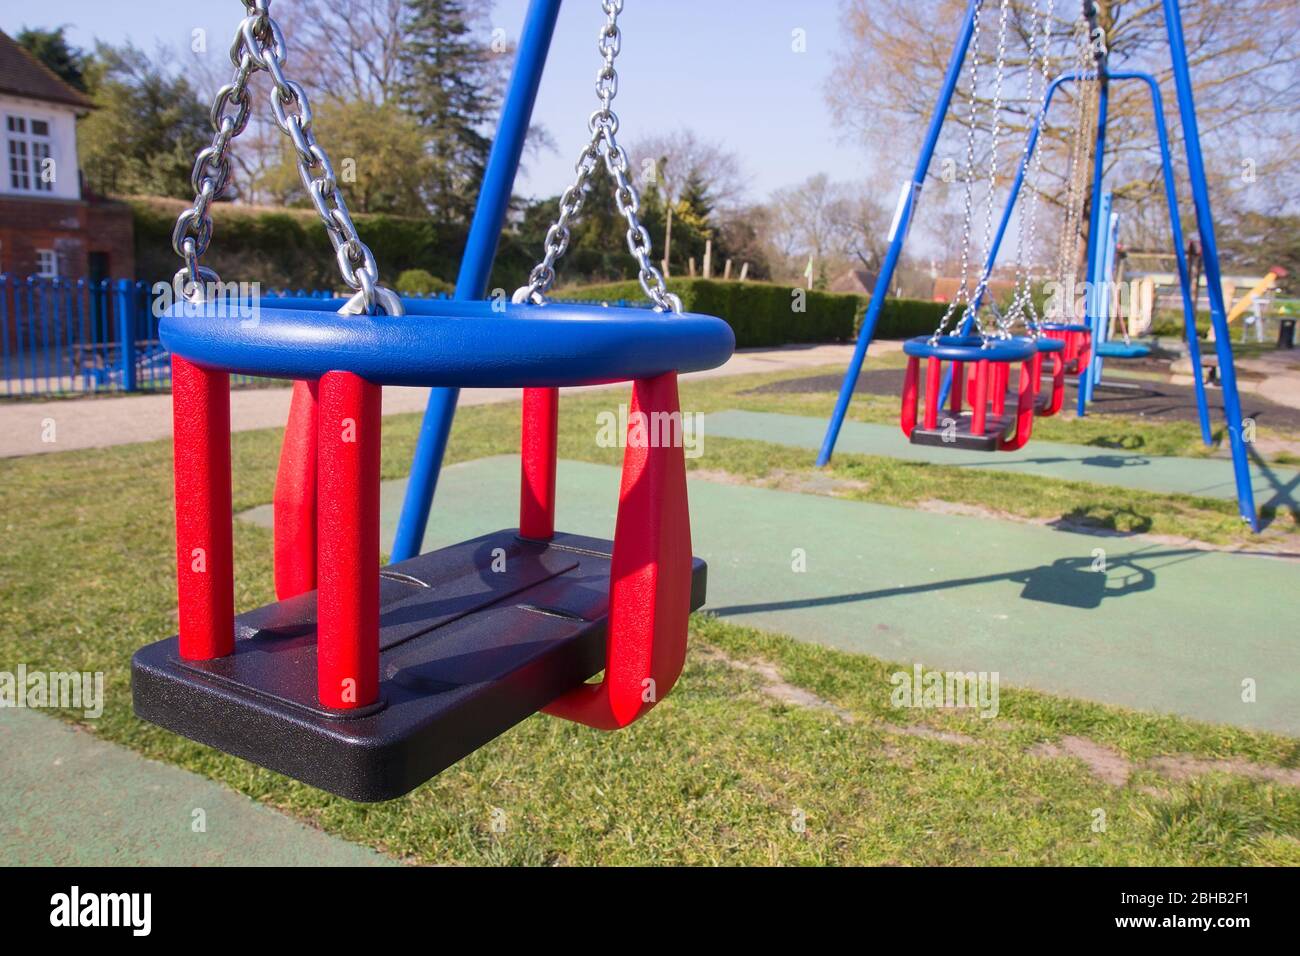 Empty swings in children's playground in England due to coronavirus quarantine for the prevention of COVID-19. Stock Photo